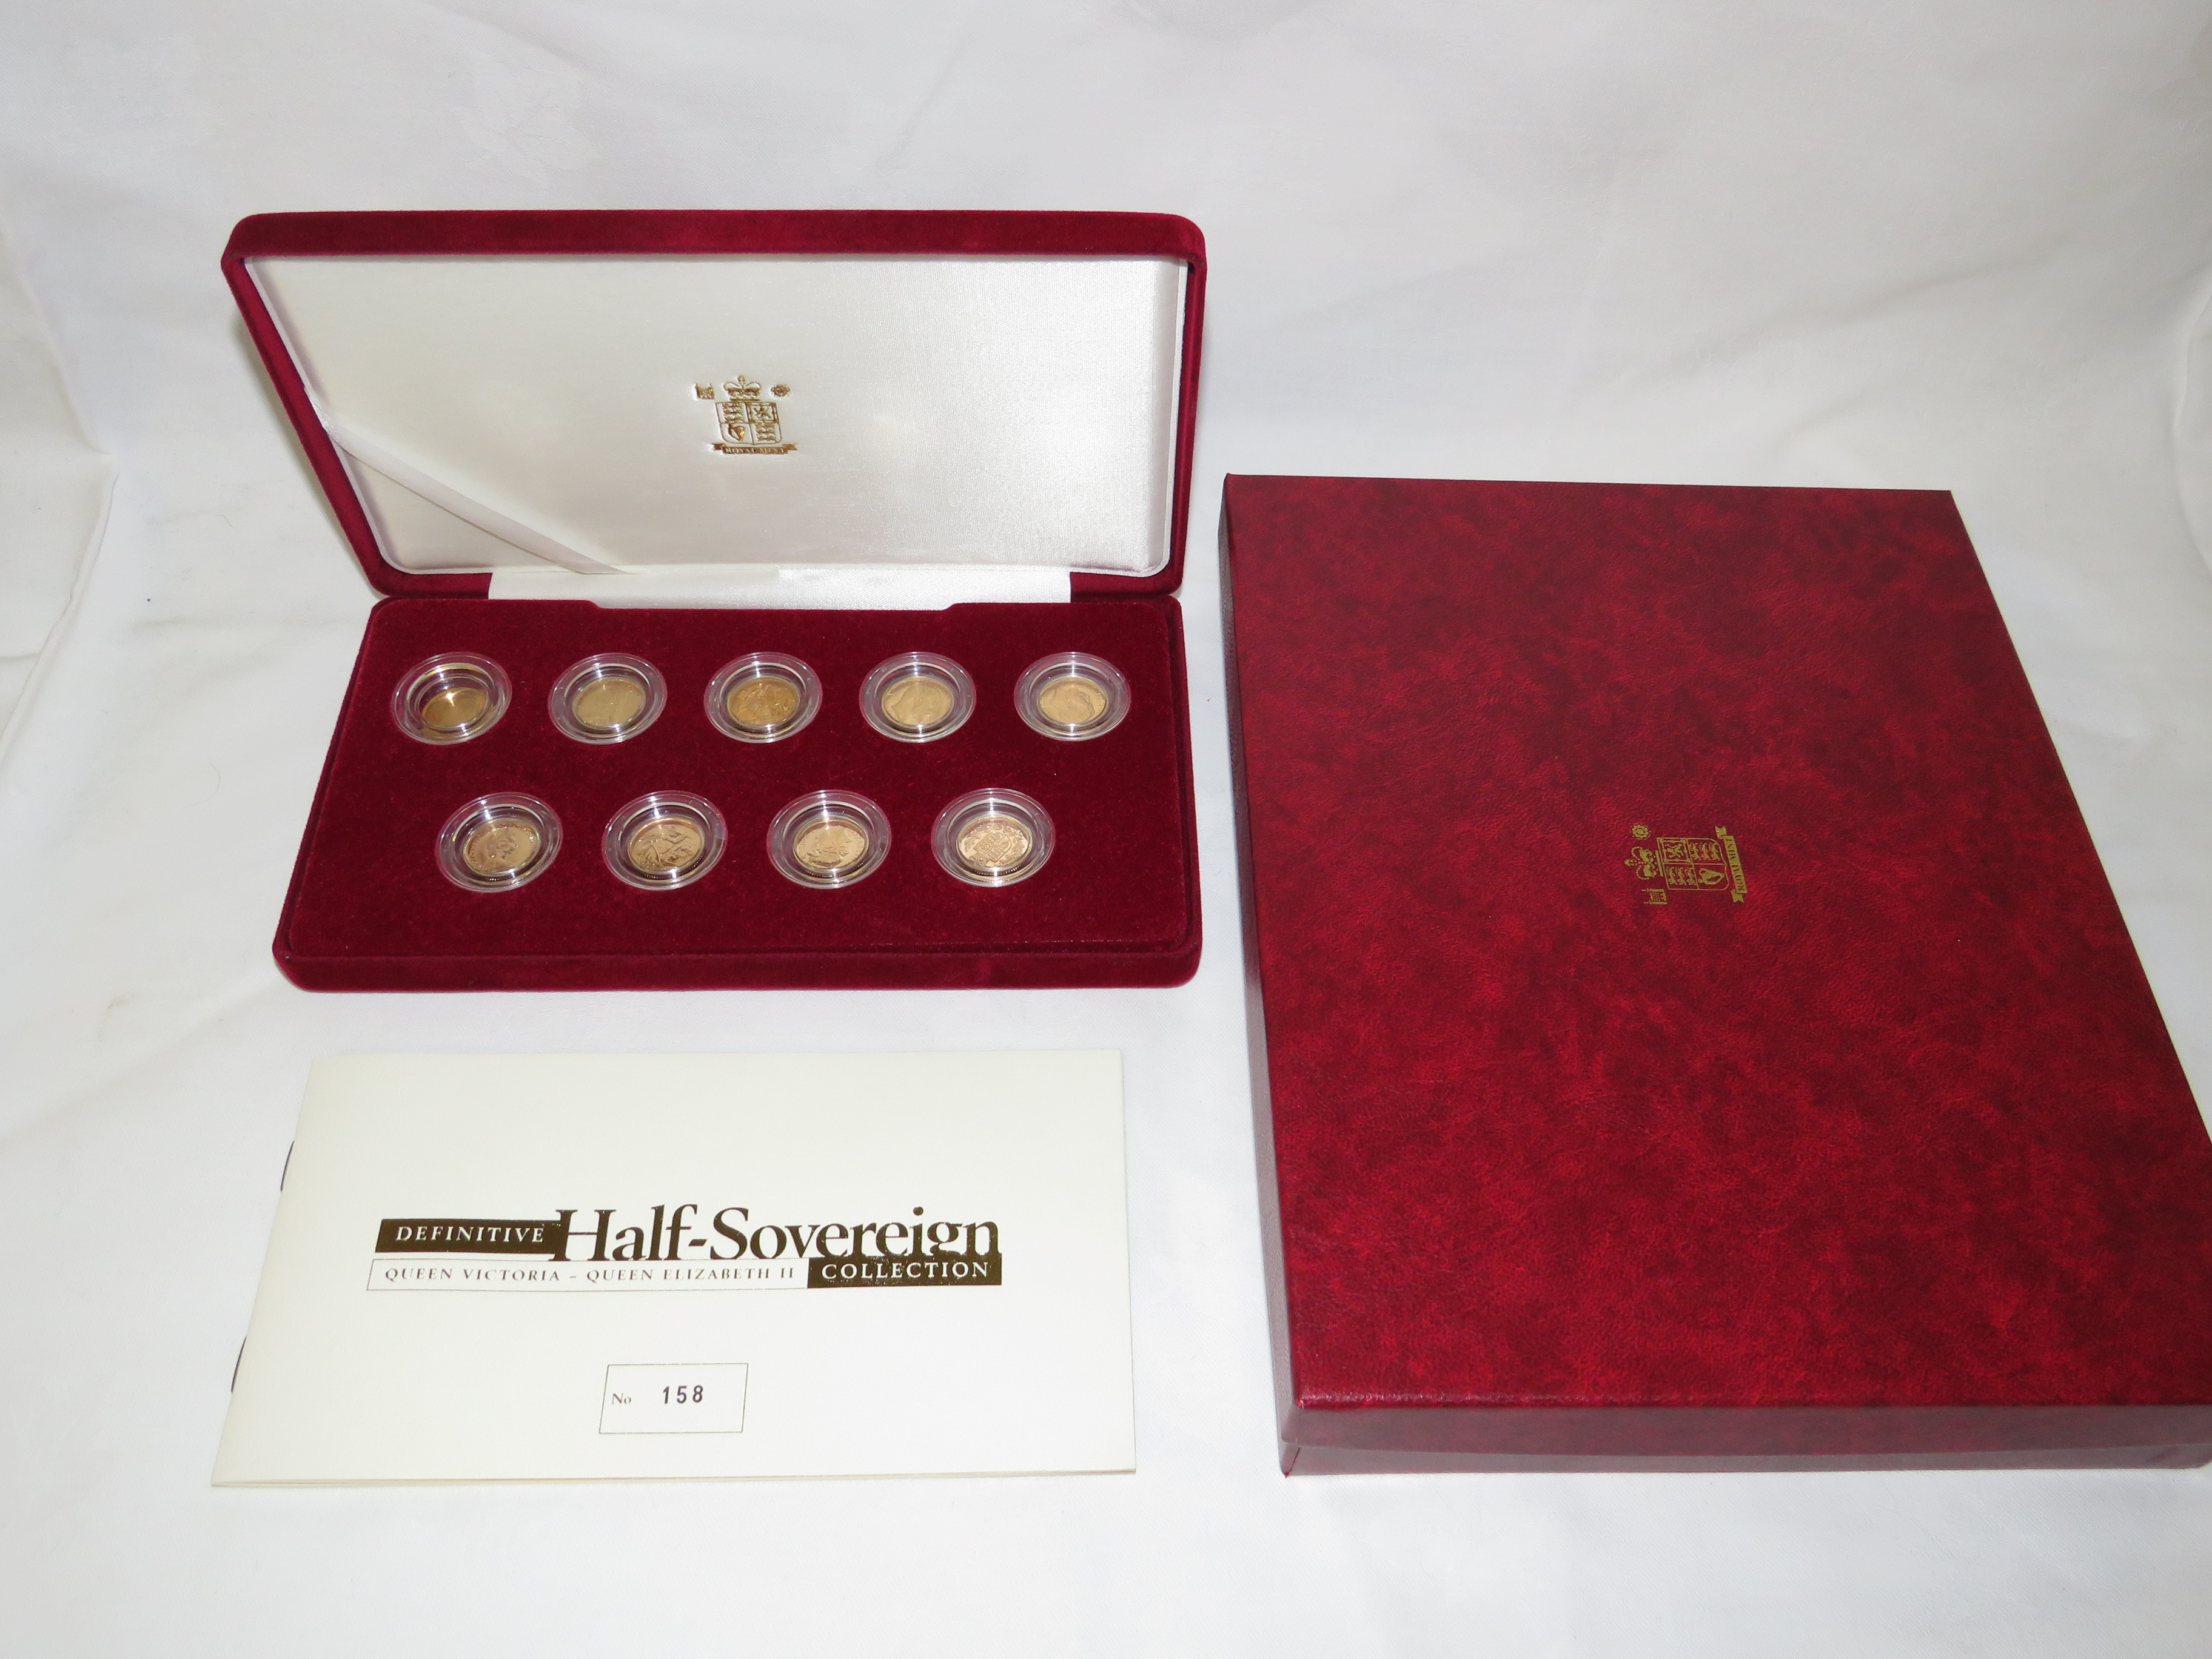 Royal Mint Half-Sovereign Definitive Collection, nine half sovereigns from Queen Victoria to Queen